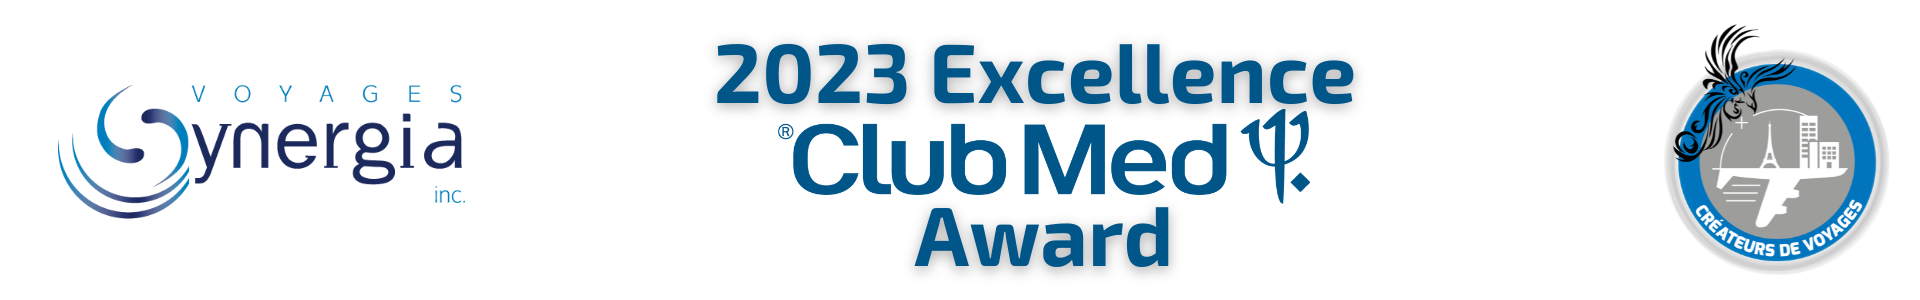 Voyages Synergia - 2023 Excellence Club Med Award